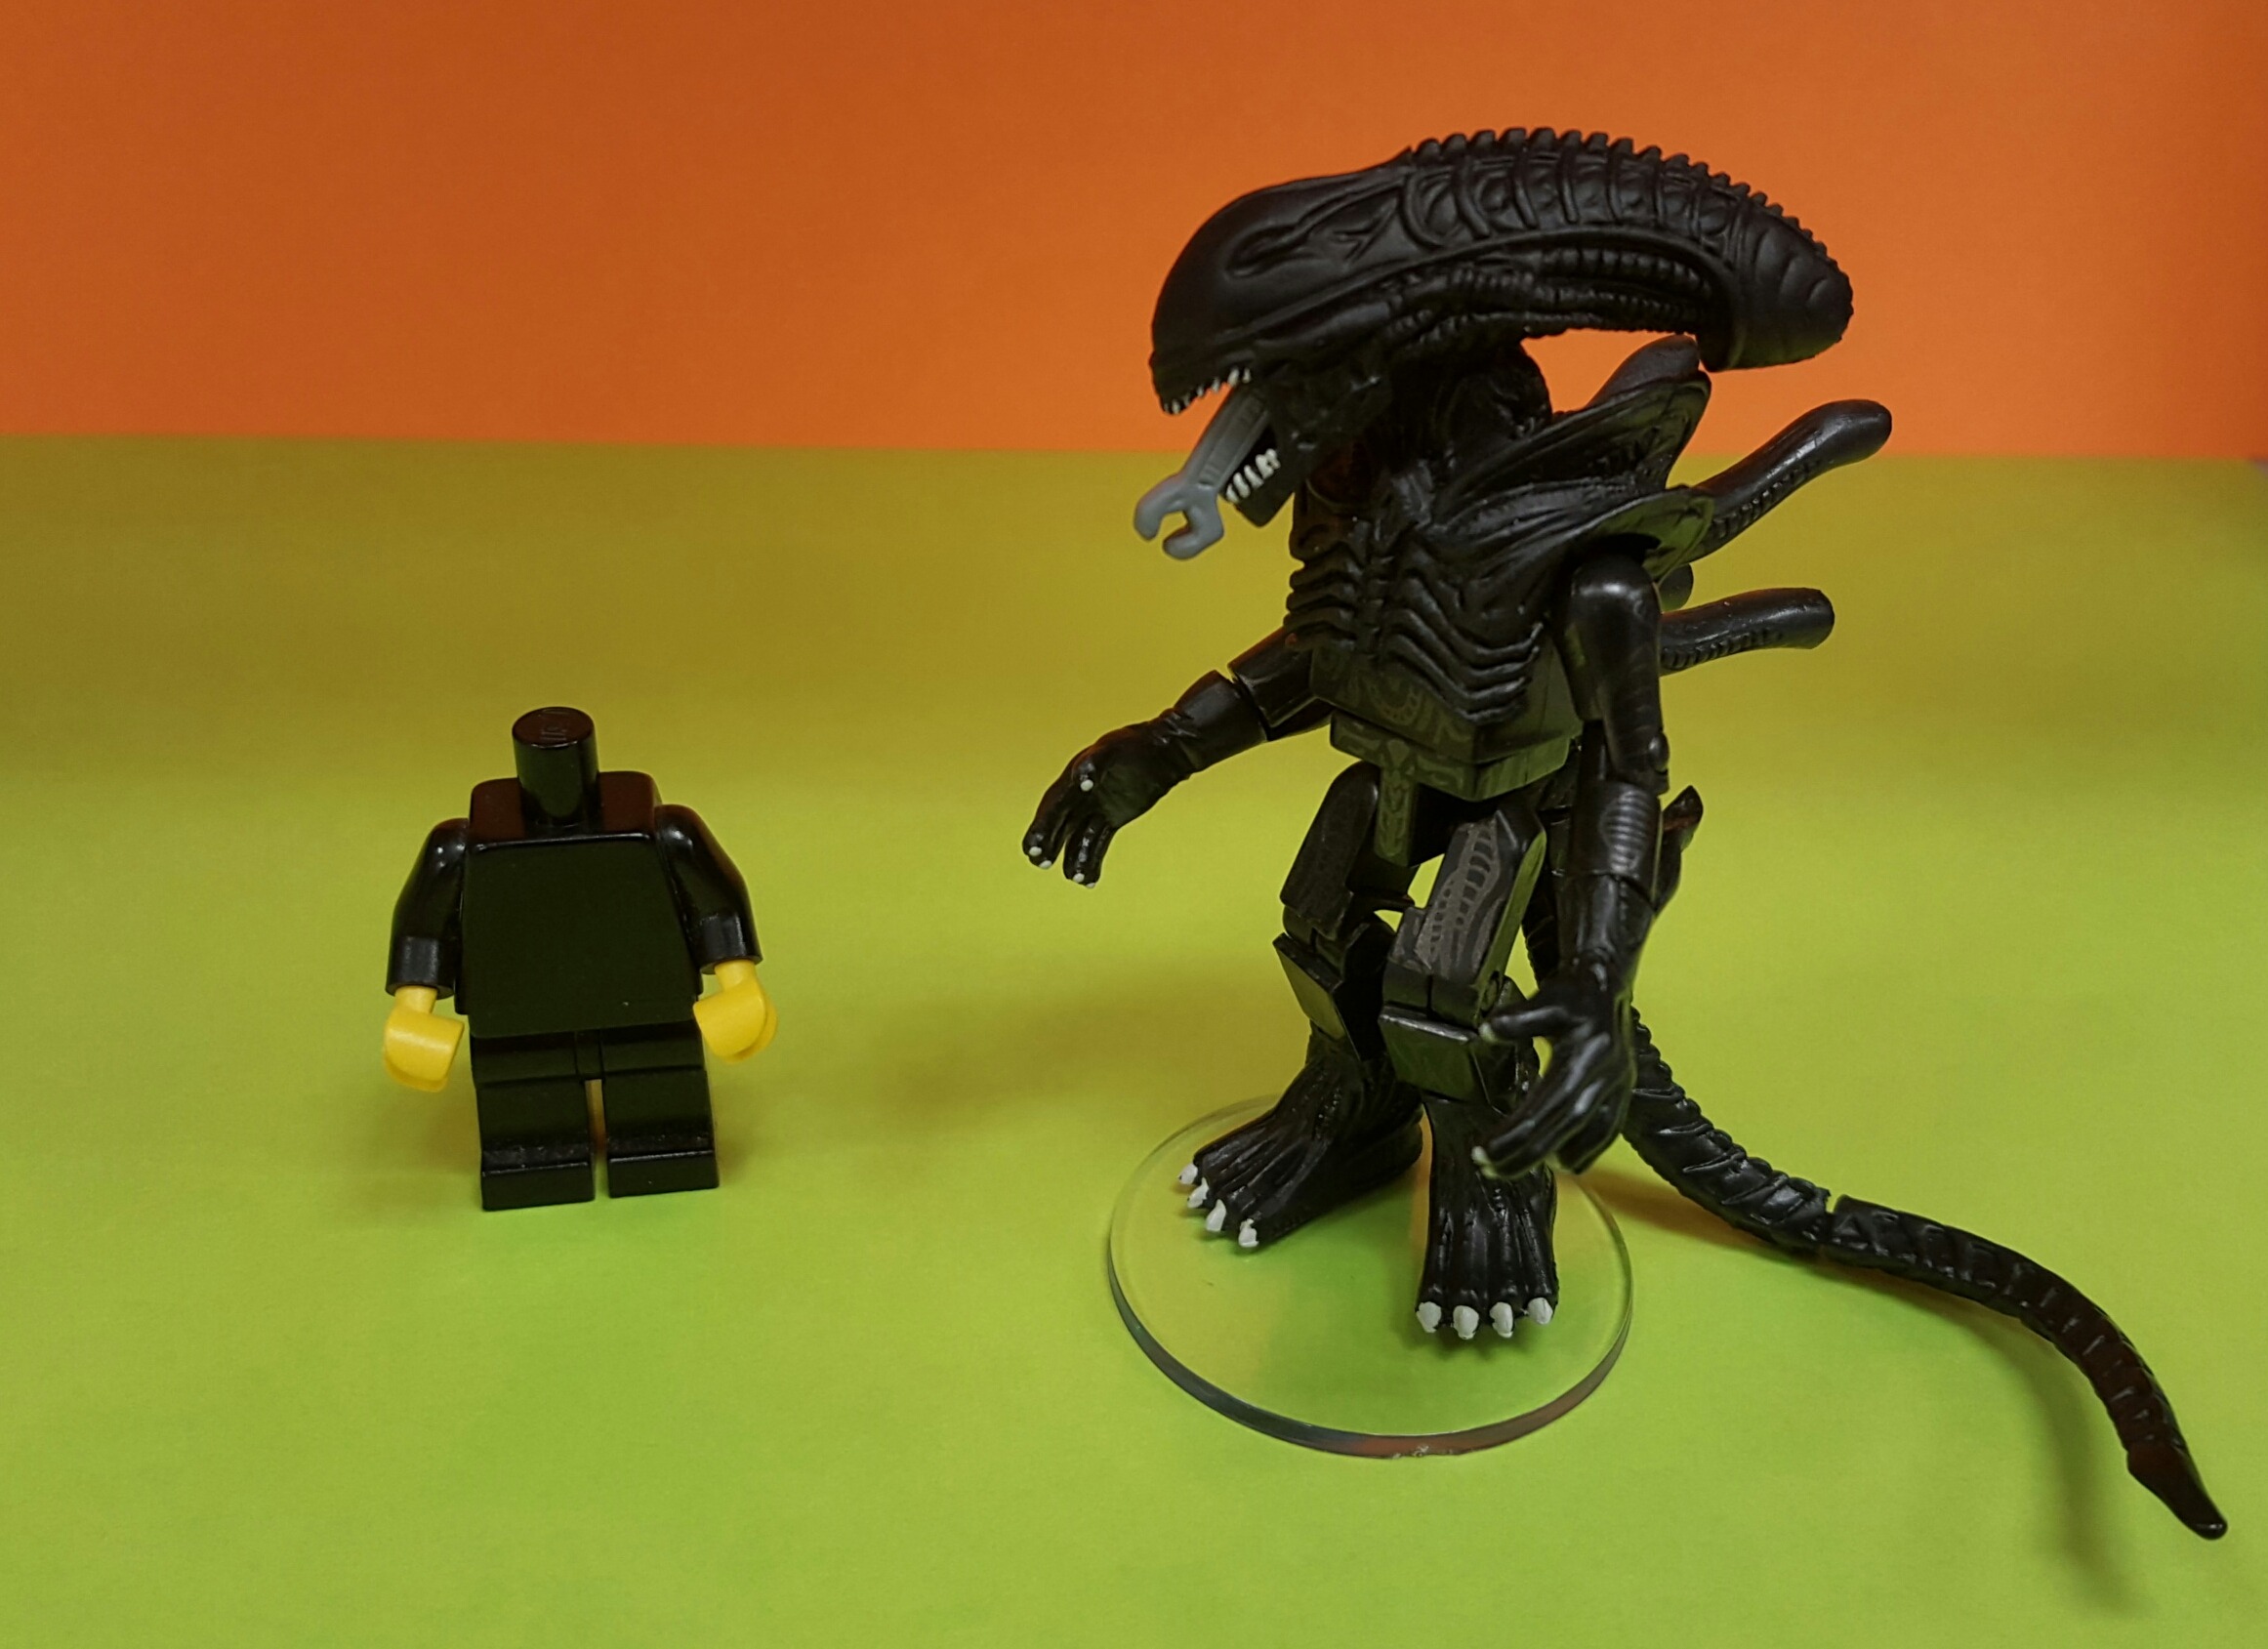 To the point, I am not disappointed with the choice I made. xenomorph lego minifigure...